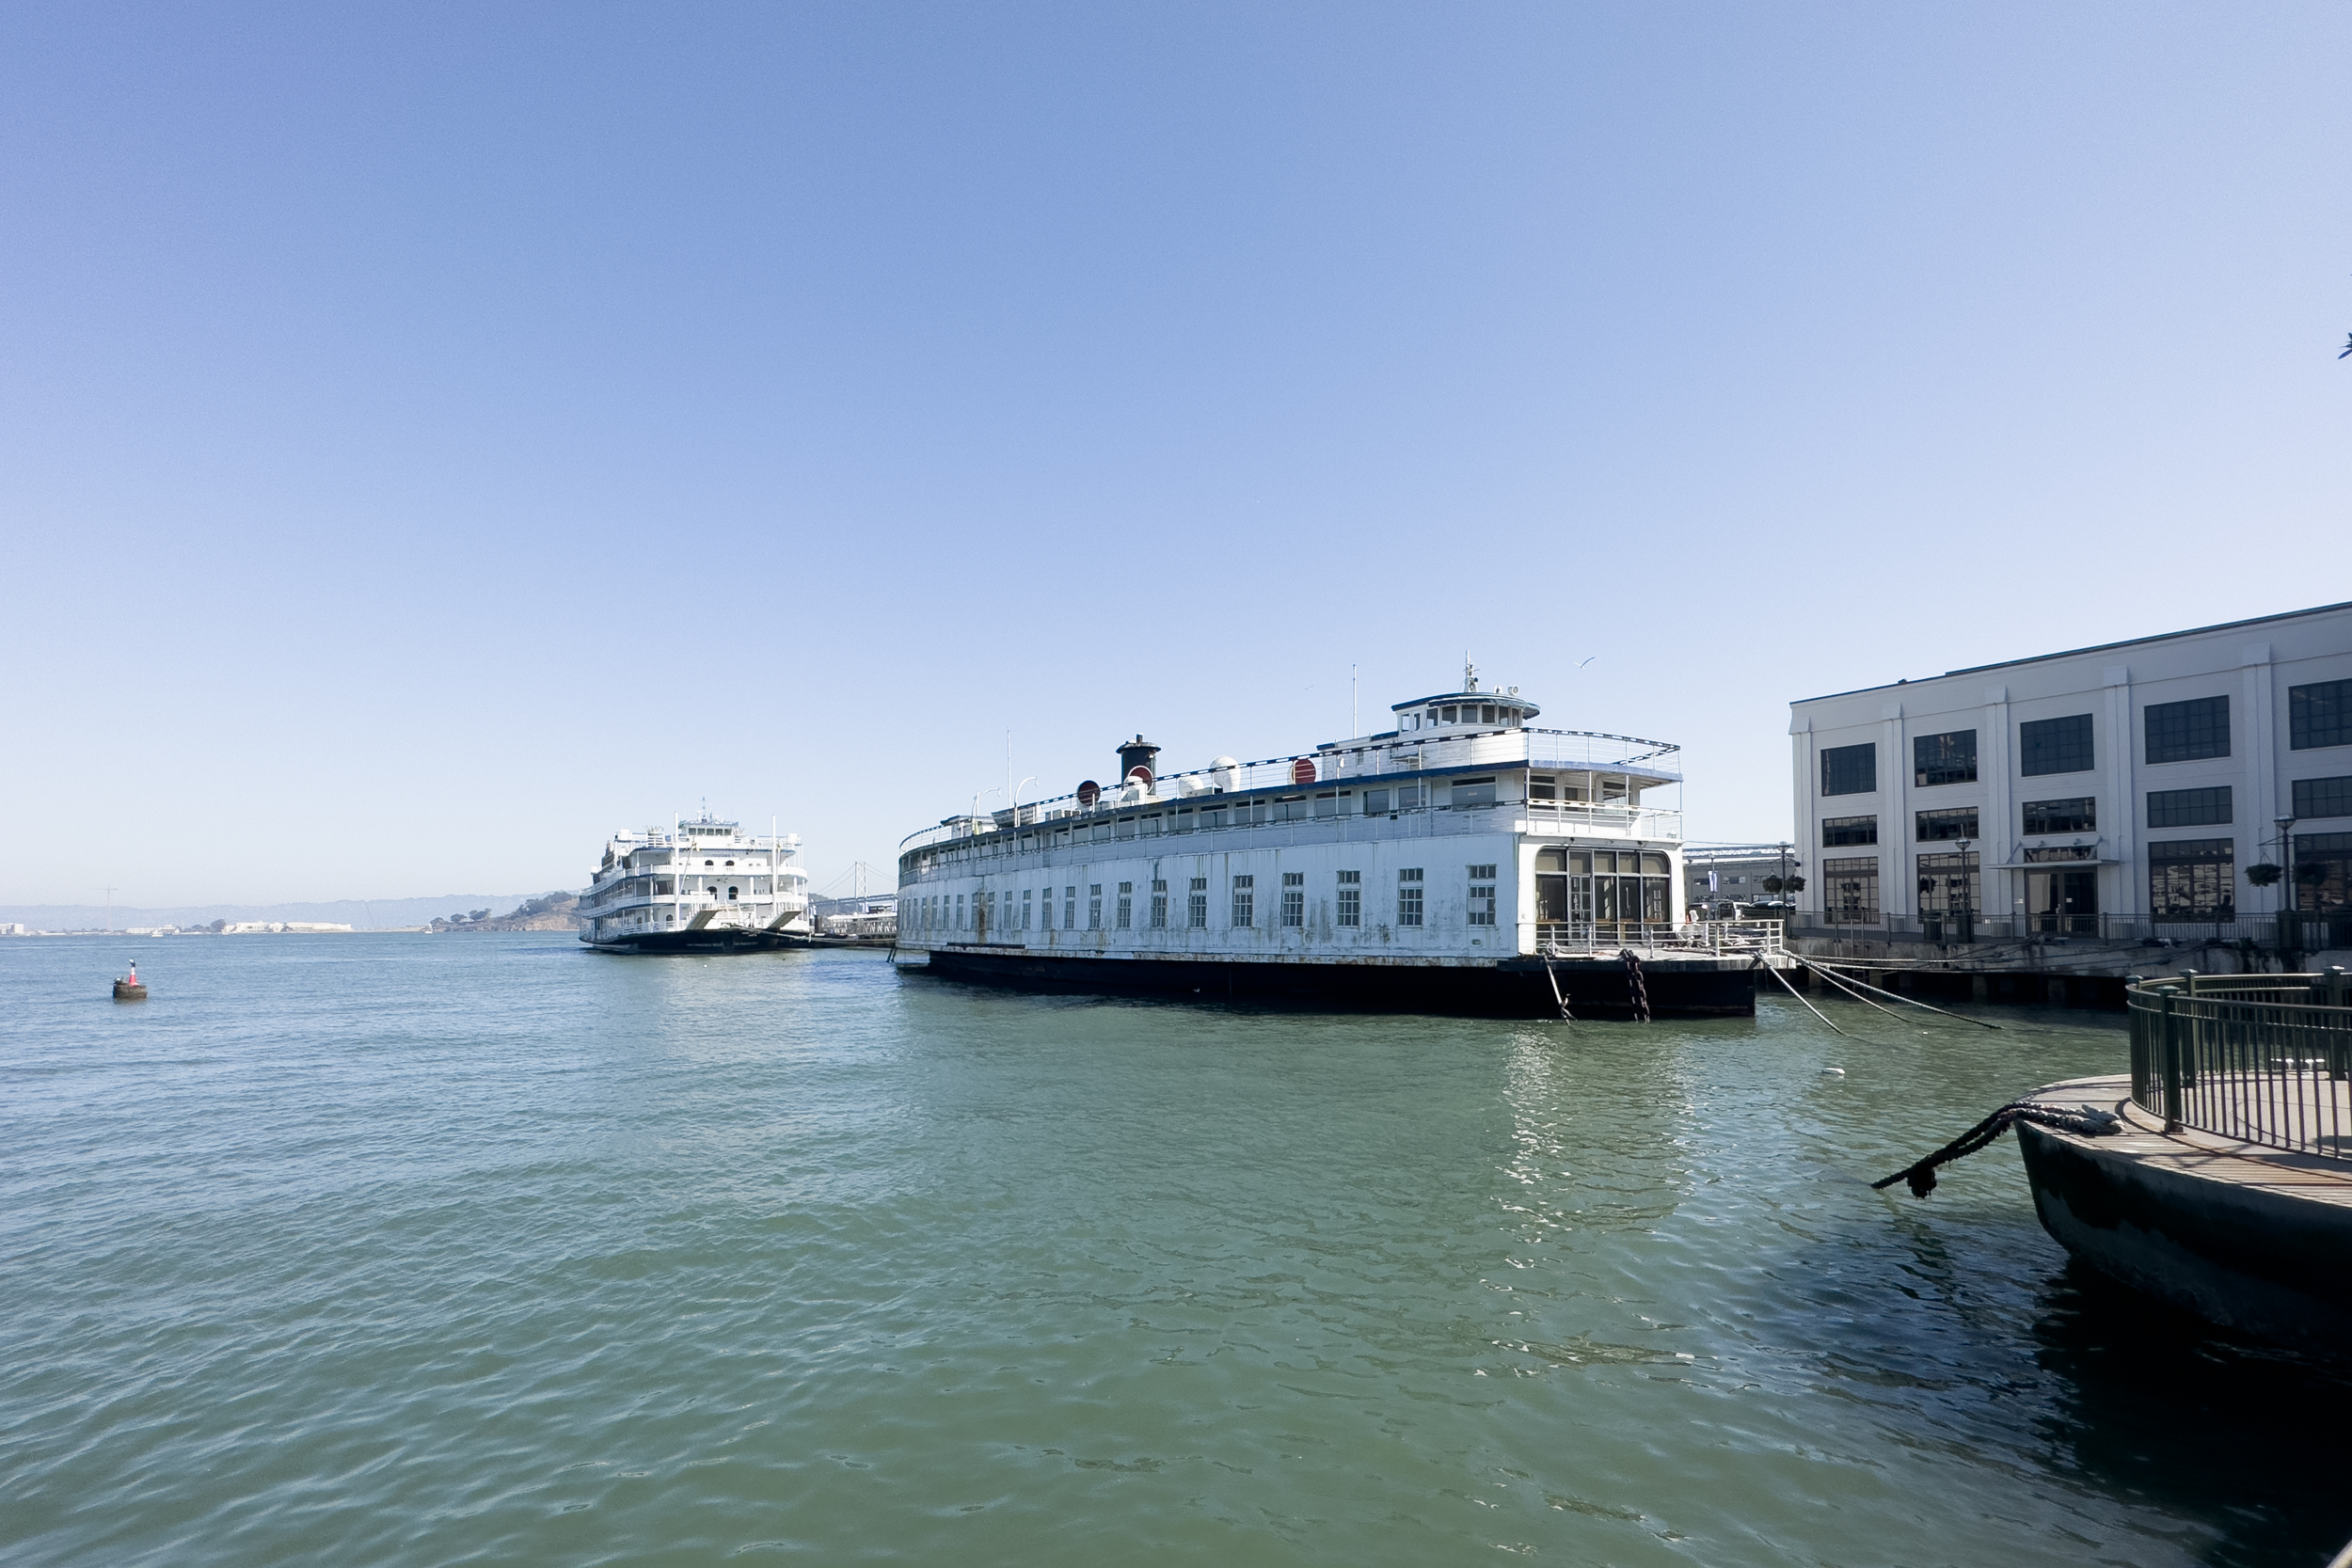 Ferryboat Santa Rosa and the San Francisco Belle Hornblower on Pier 3, image by Andrew Campbell Nelson